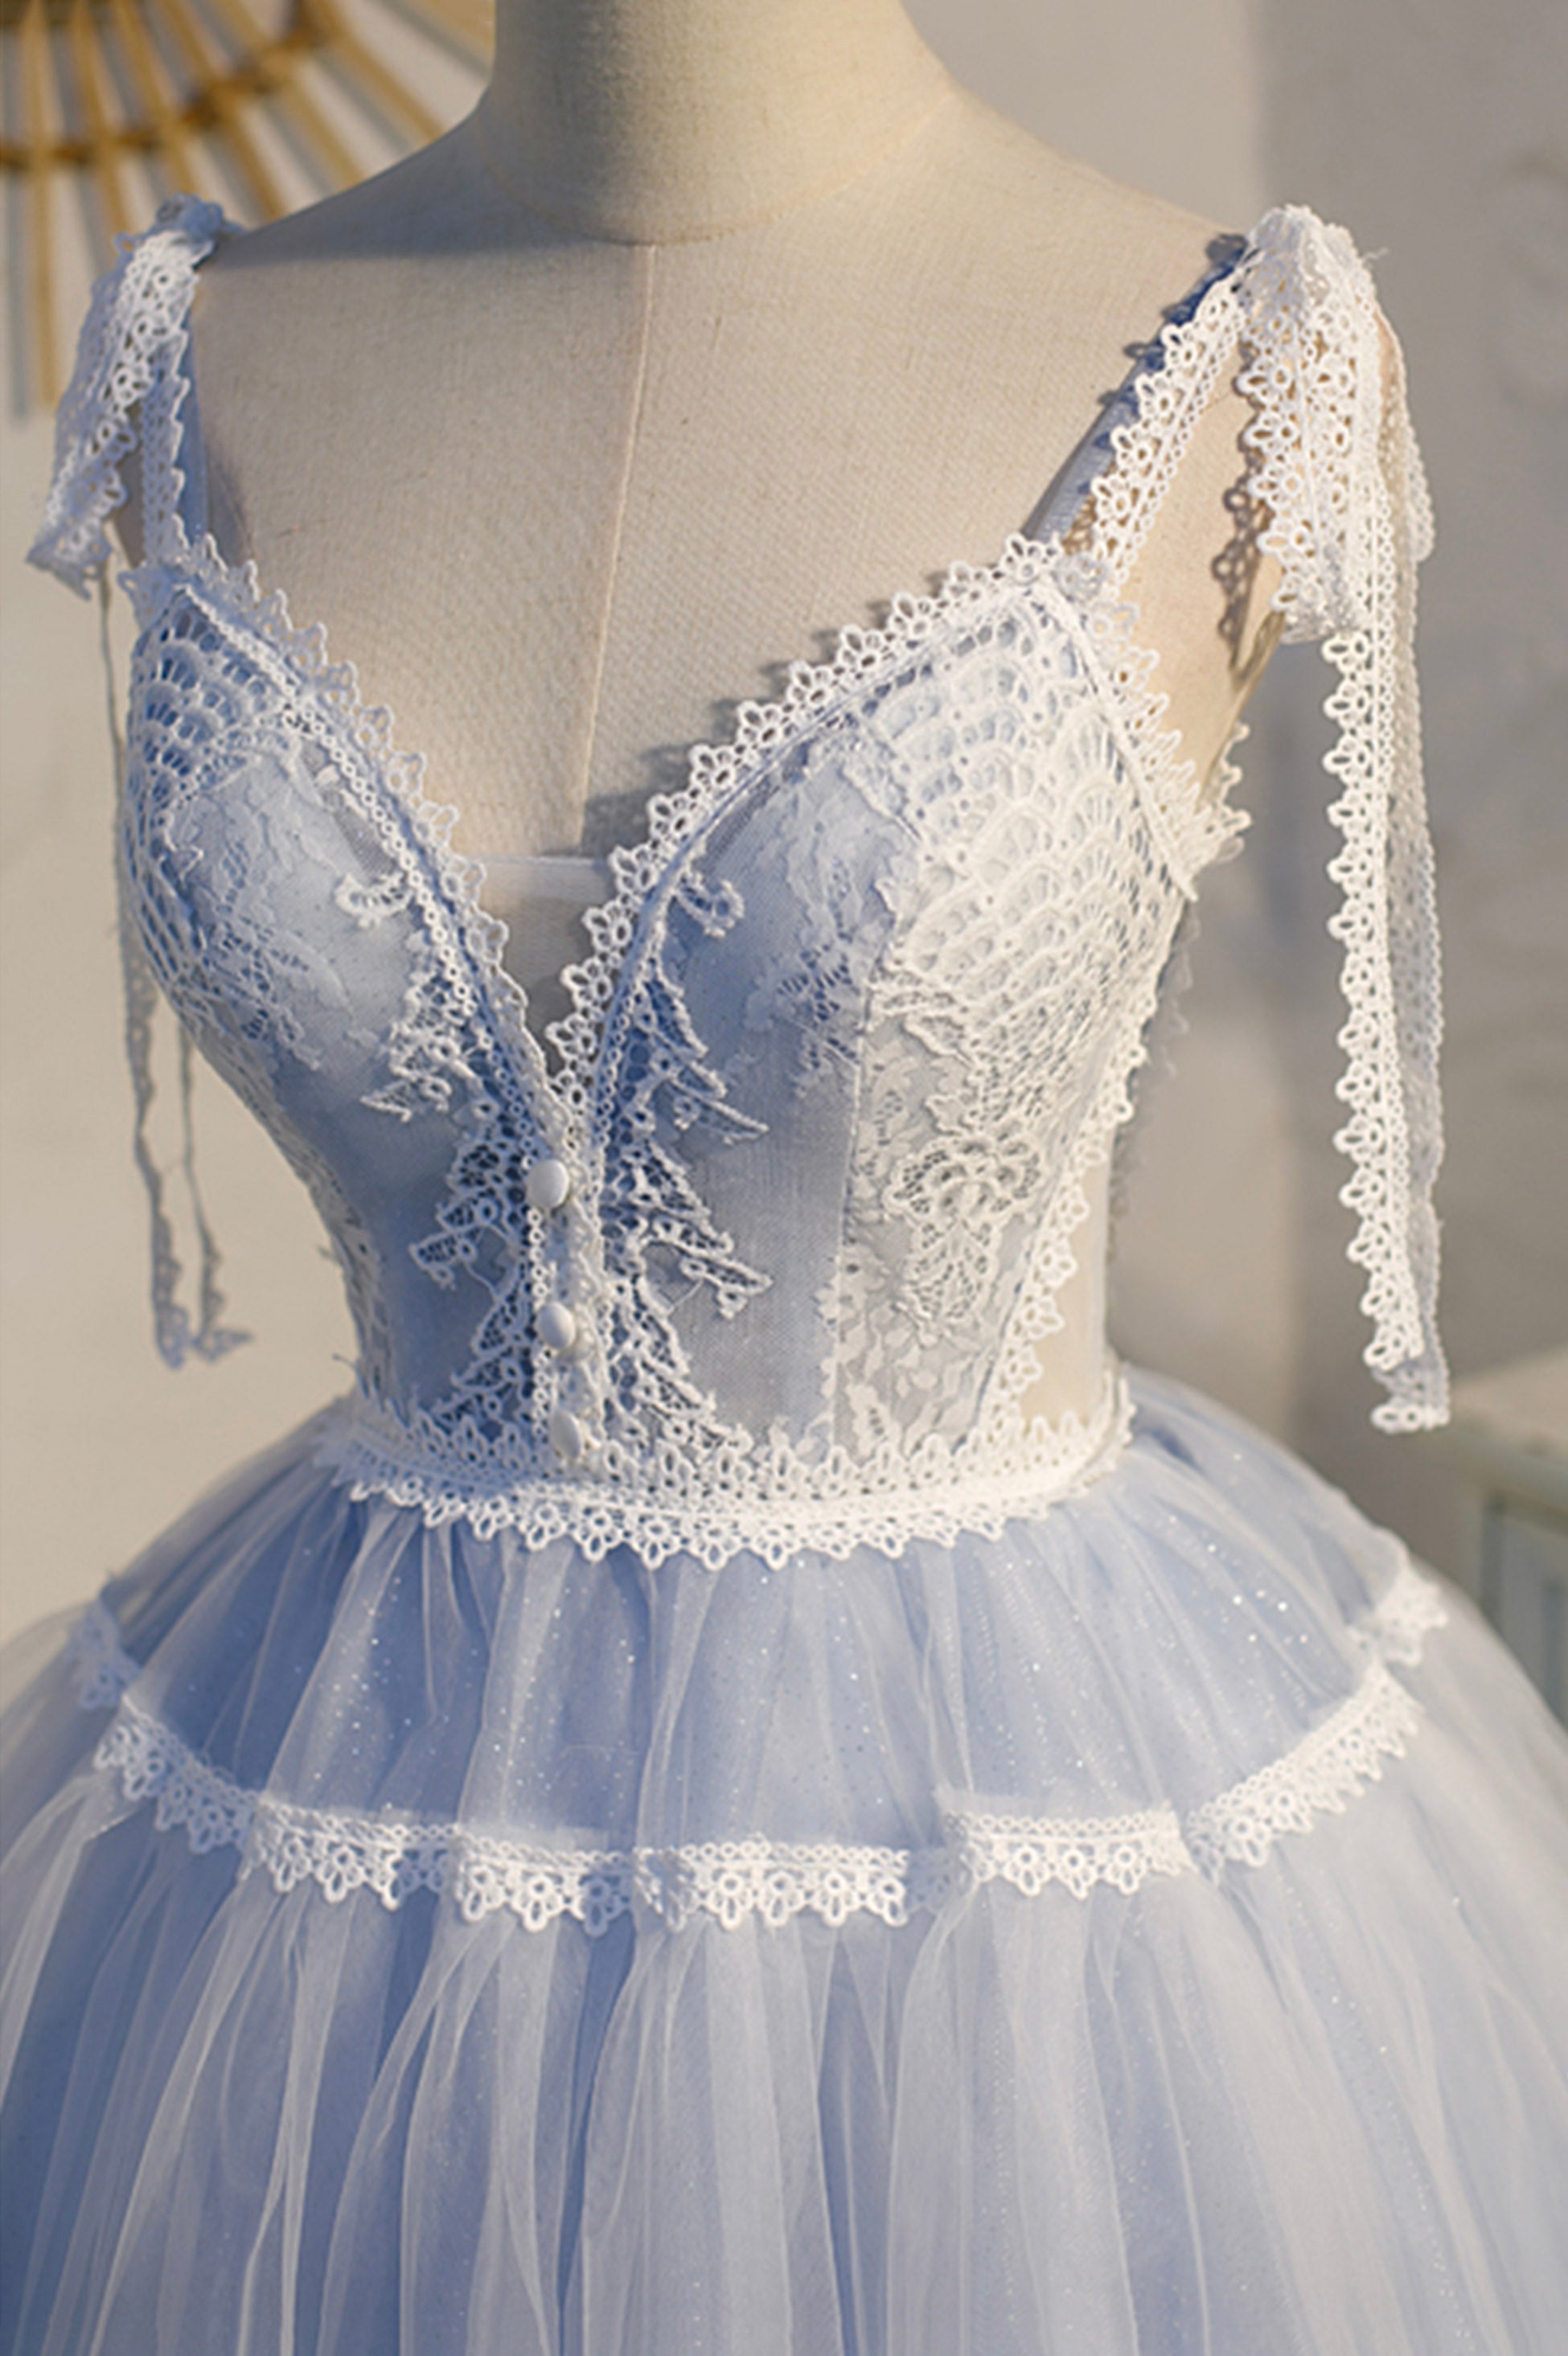 Formal Dress Outfit, Blue Lace Short A-Line Prom Dress, Cute V-Neck Homecoming Party Dress